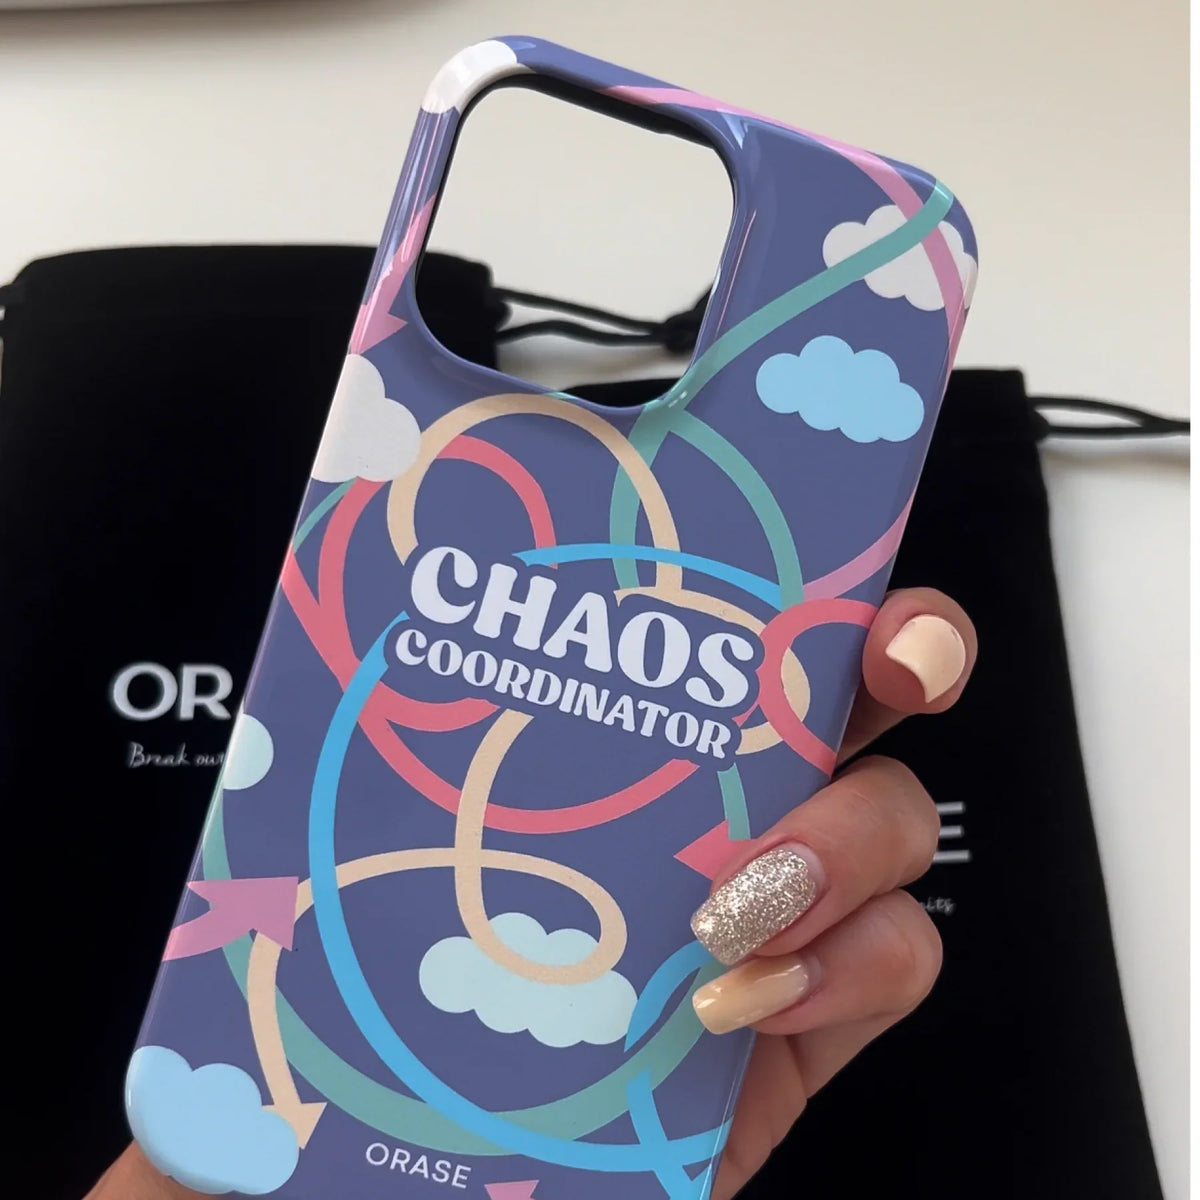 Chaos Coordinator iPhone Case - iPhone 11 Pro Max